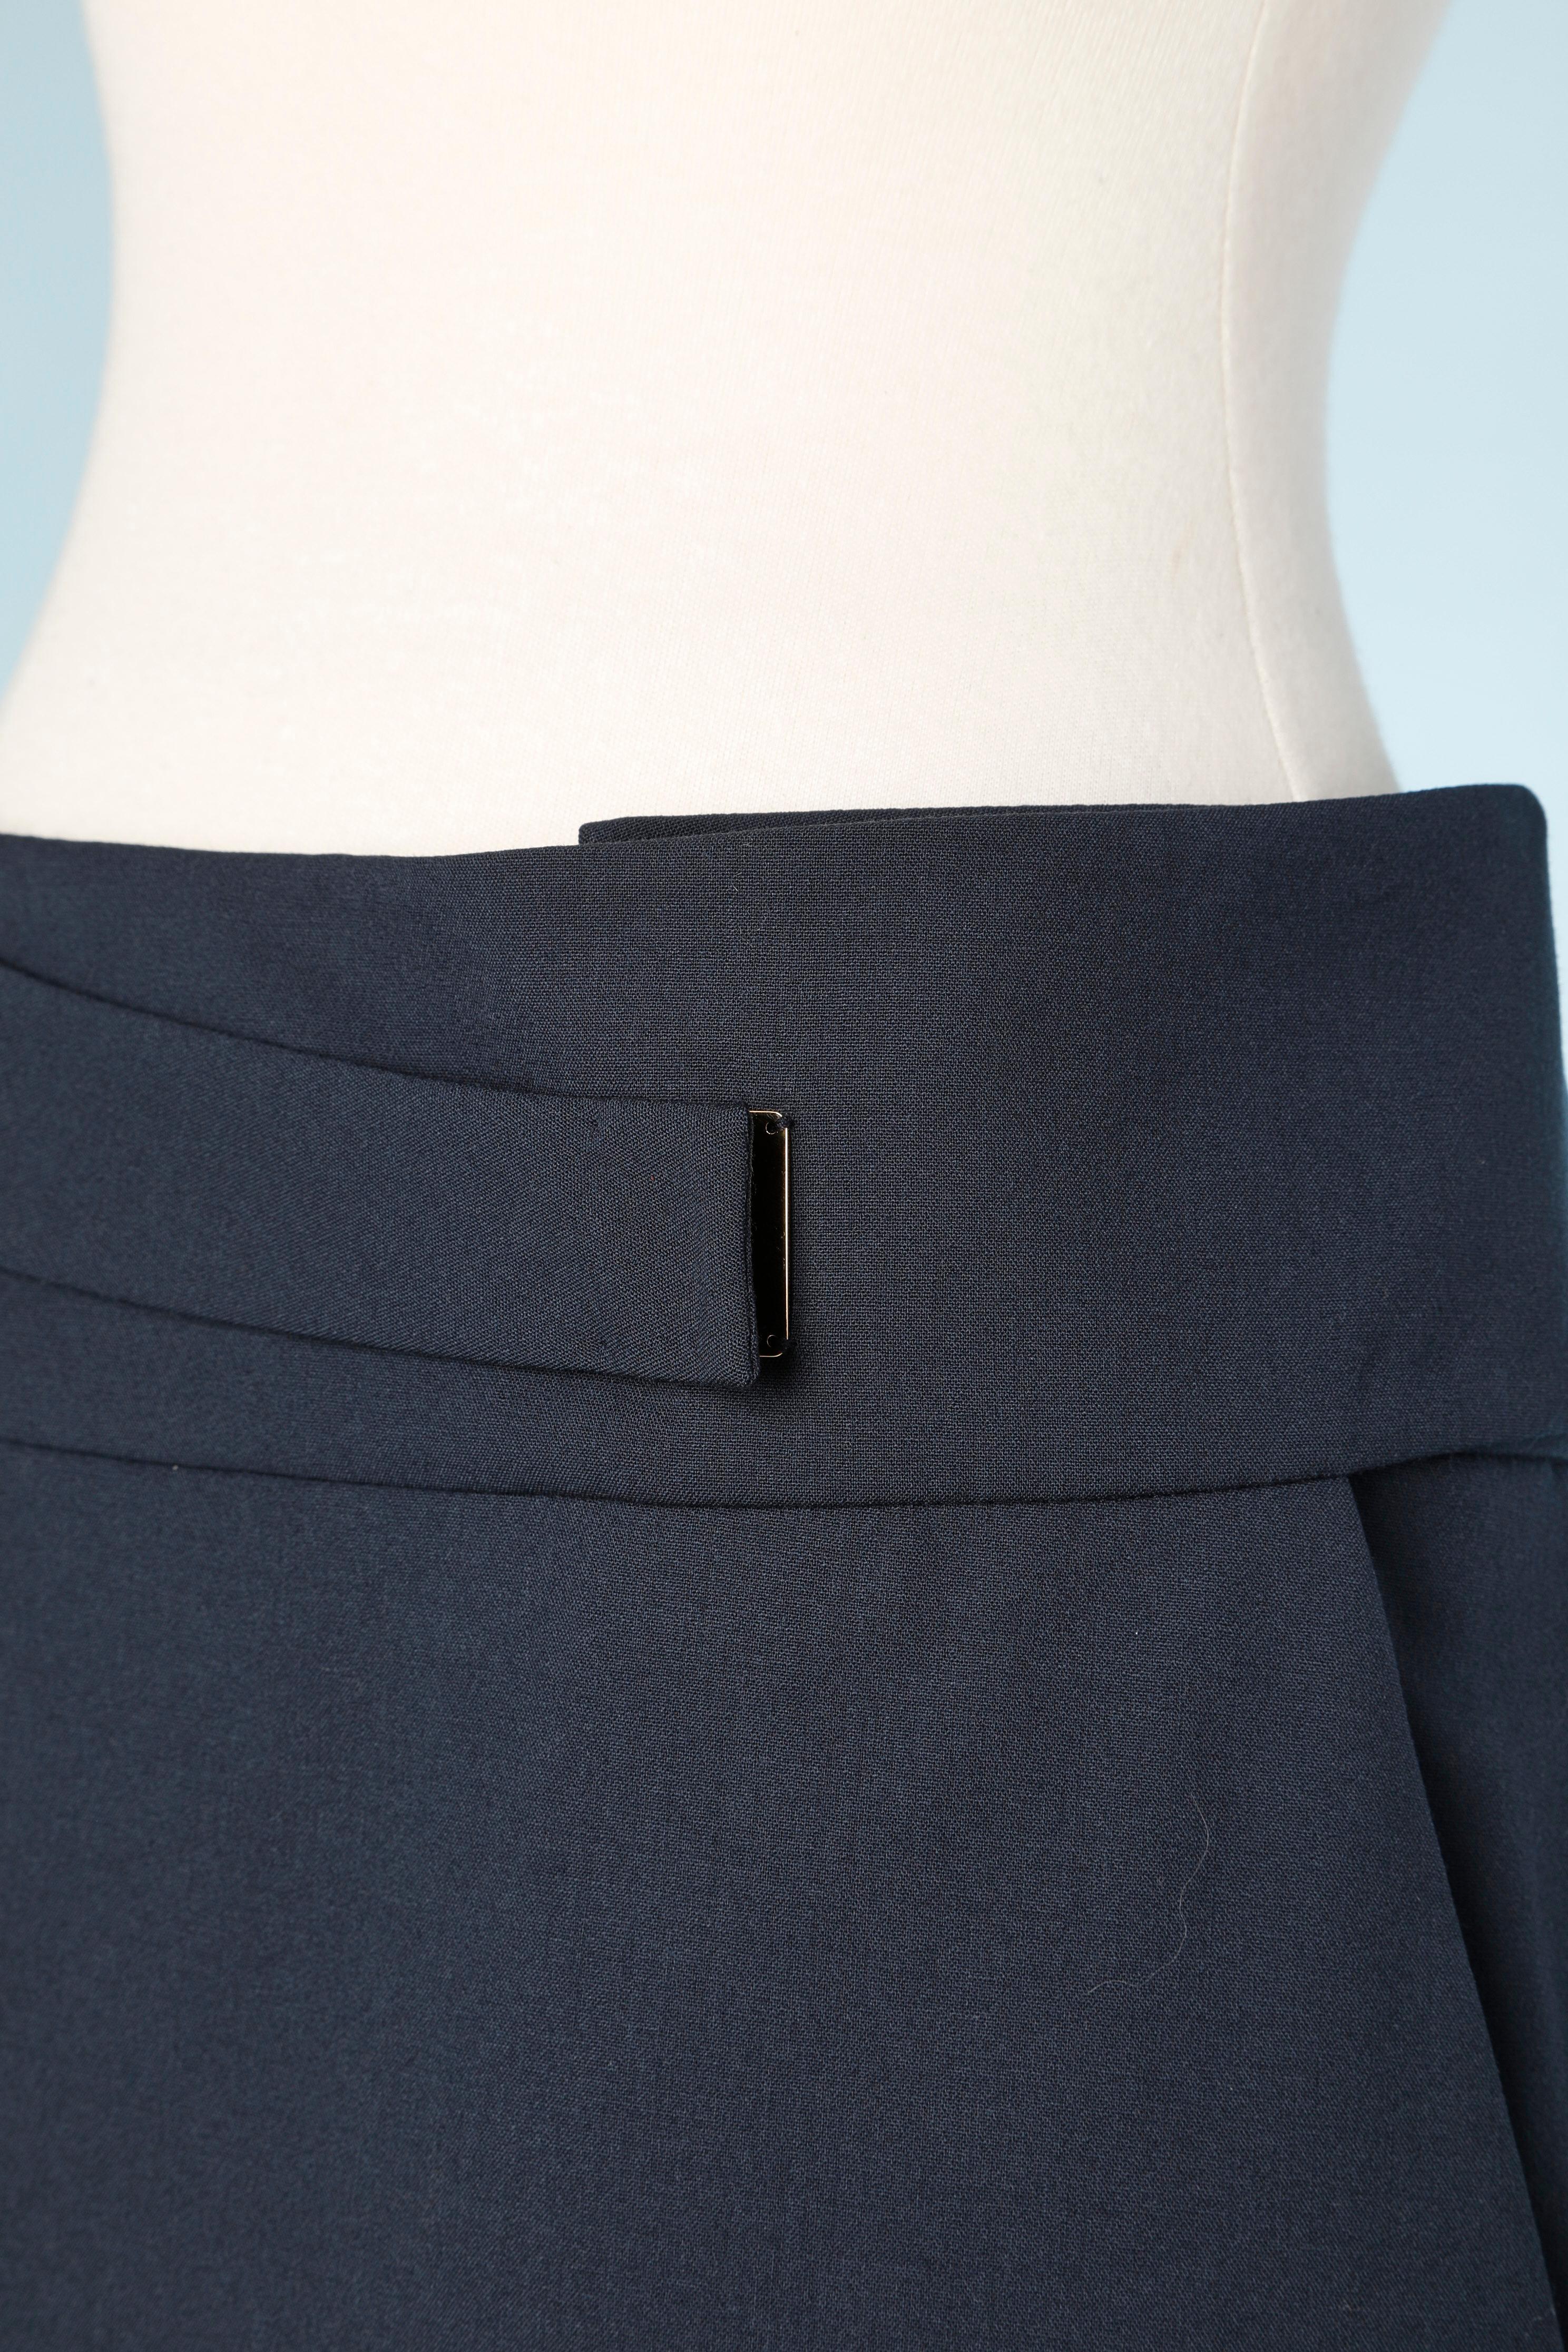 Navy blue thin wool skirt with wrap fabric belt Yves Saint Laurent Rive Gauche  In Excellent Condition For Sale In Saint-Ouen-Sur-Seine, FR